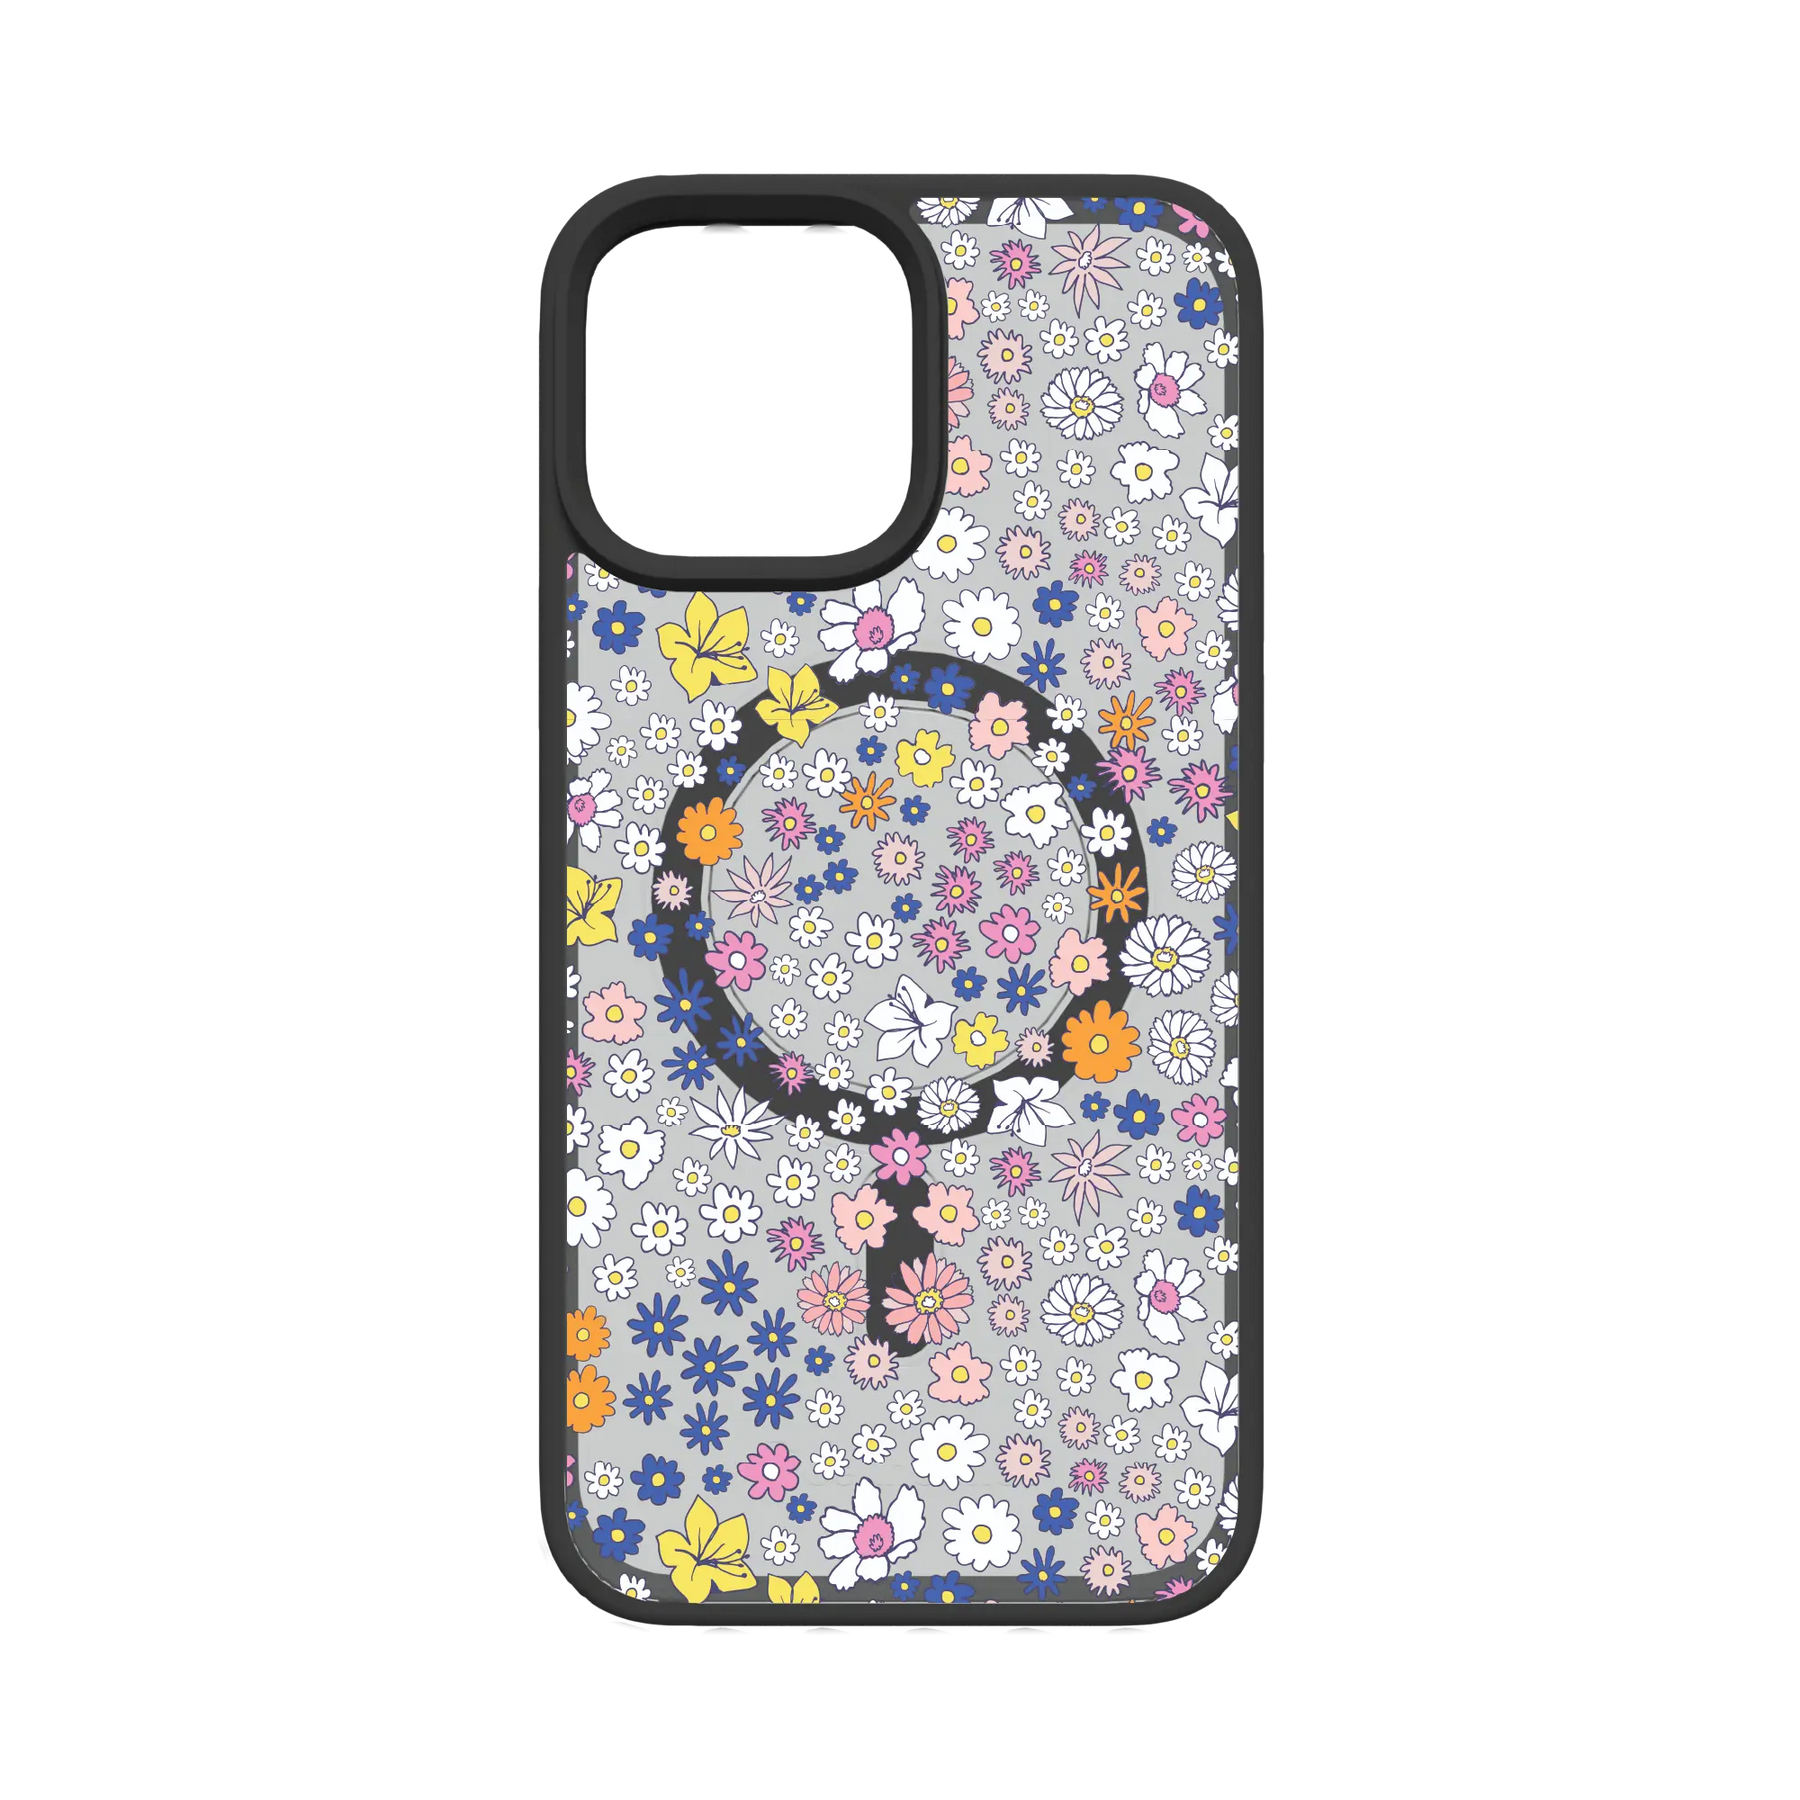 Apple-iPhone-13-Pro-Max-Crystal-Clear Wild Blossom | Protective MagSafe Case | Flower Series for Apple iPhone 13 Series cellhelmet cellhelmet